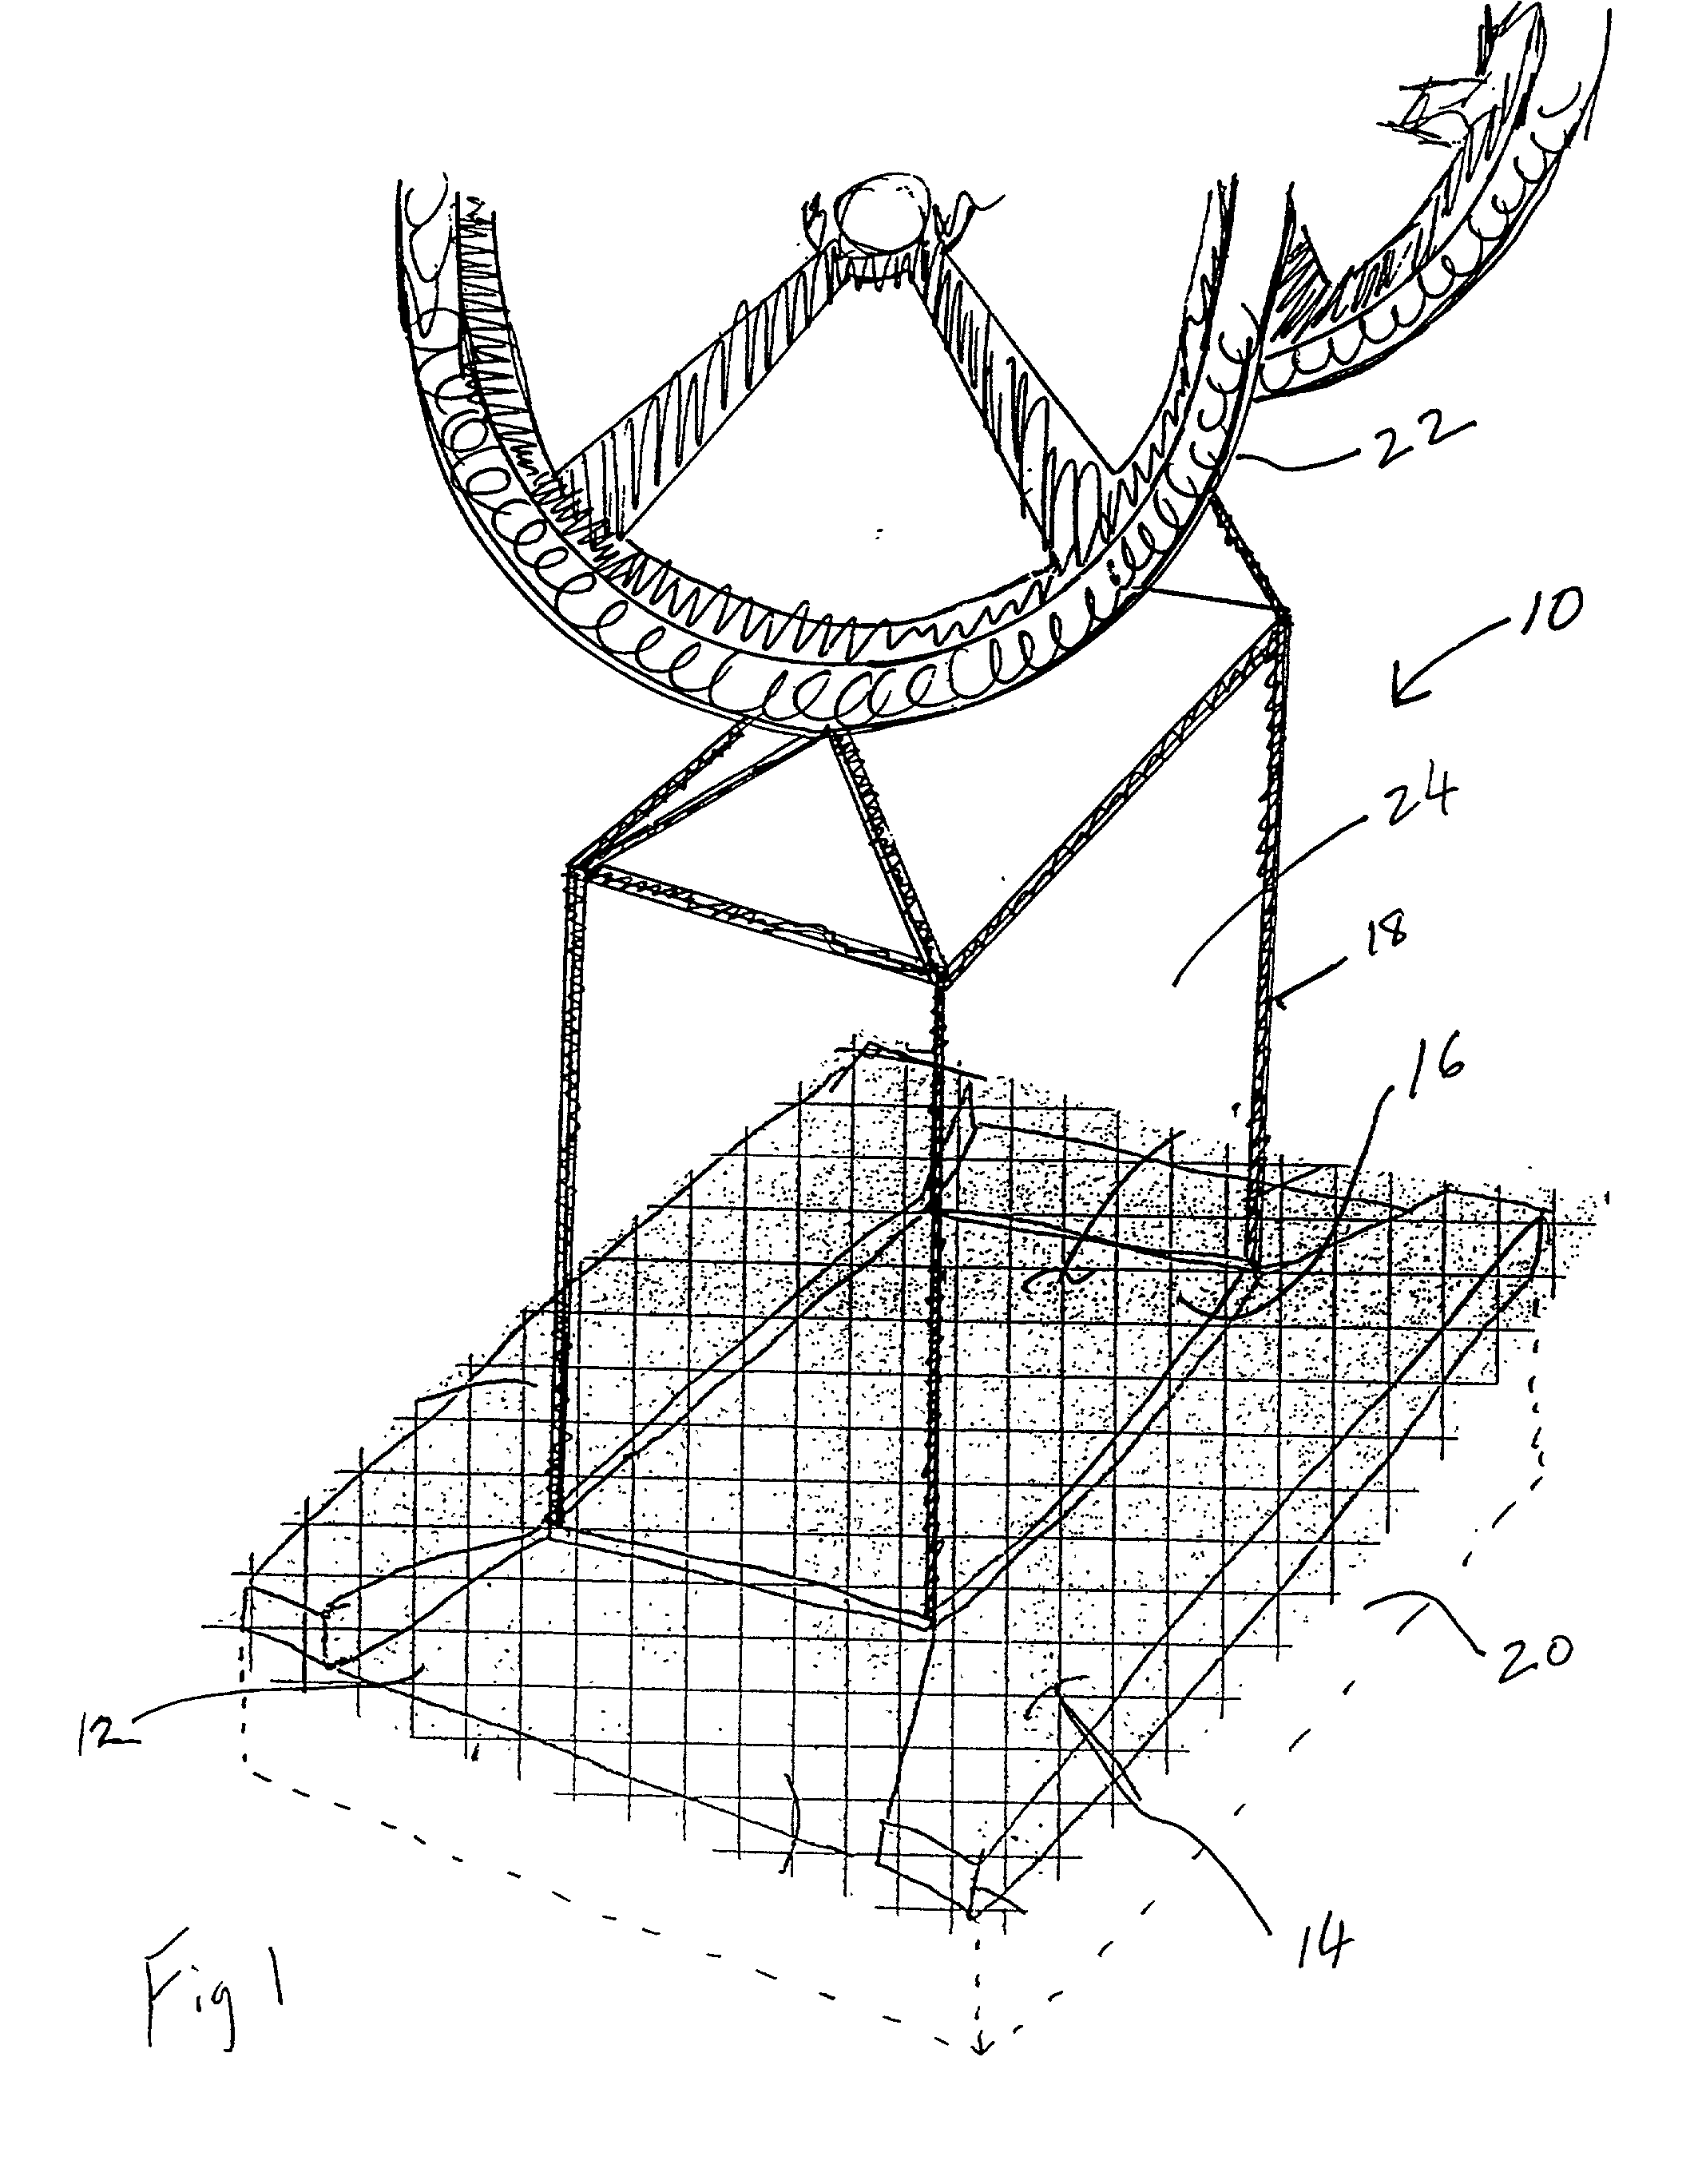 Vertical conveyor device for various sized payloads